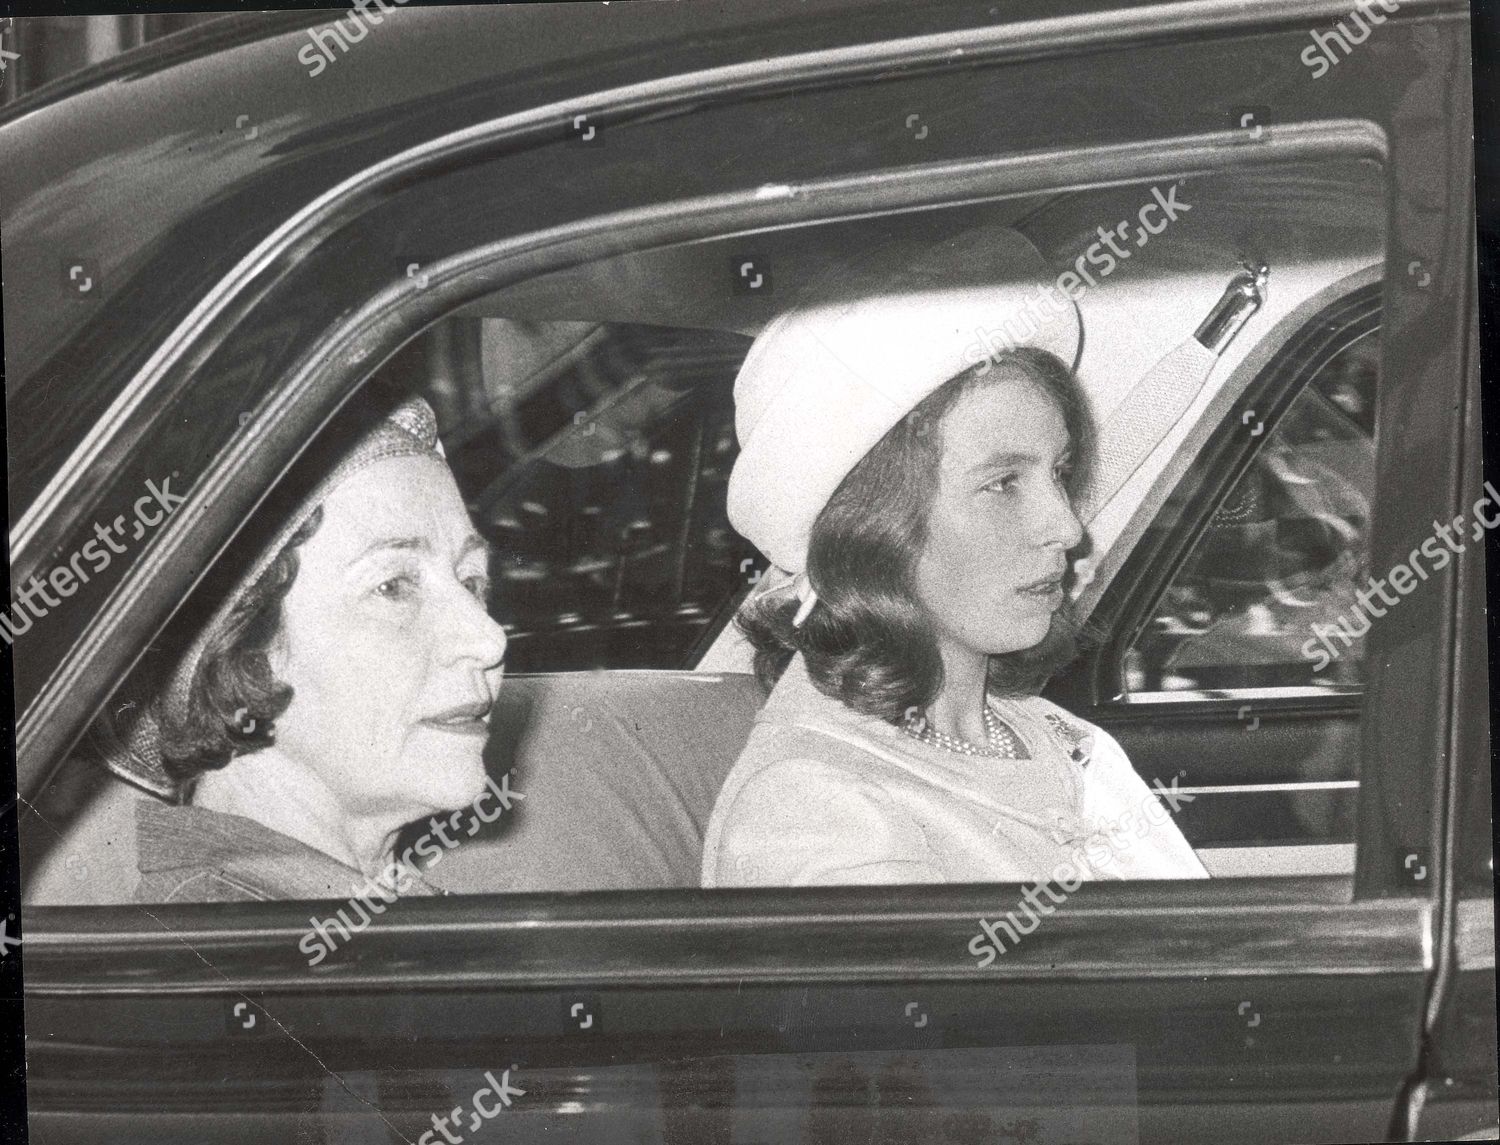 princess-anne-now-princess-royal-april-1966-princess-anne-is-pictured-returing-to-buckingham-palace-by-car-with-royal-governess-miss-catherine-peebles-after-watching-the-queen-ceremoniously-open-parliament-royalty-shutterstock-editorial-890787a.jpg